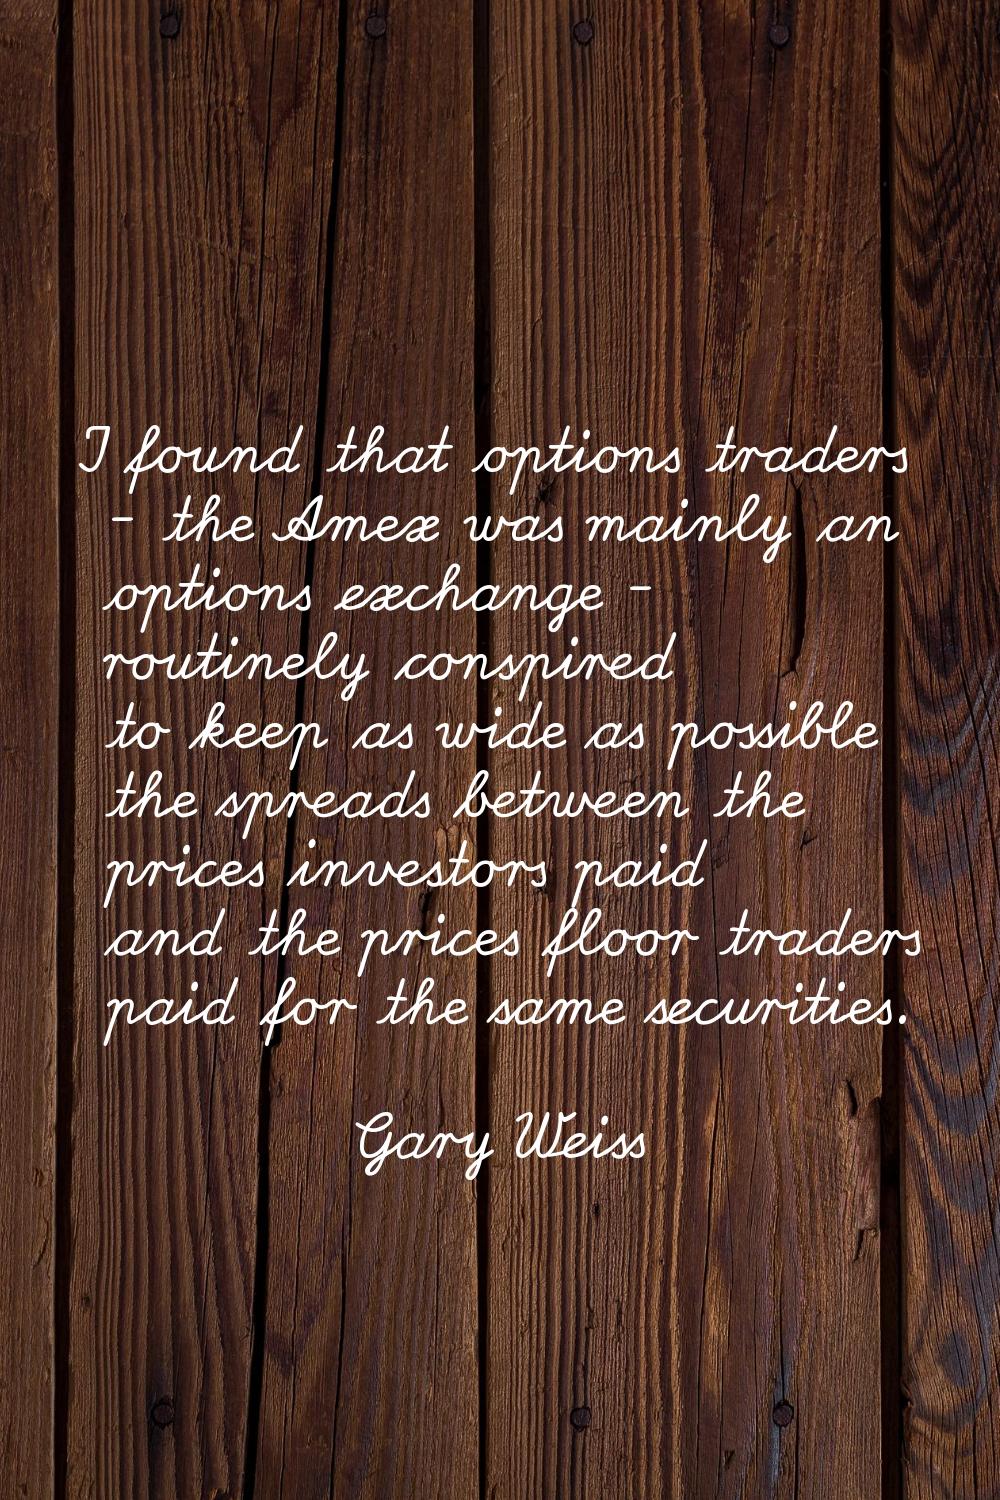 I found that options traders - the Amex was mainly an options exchange - routinely conspired to kee